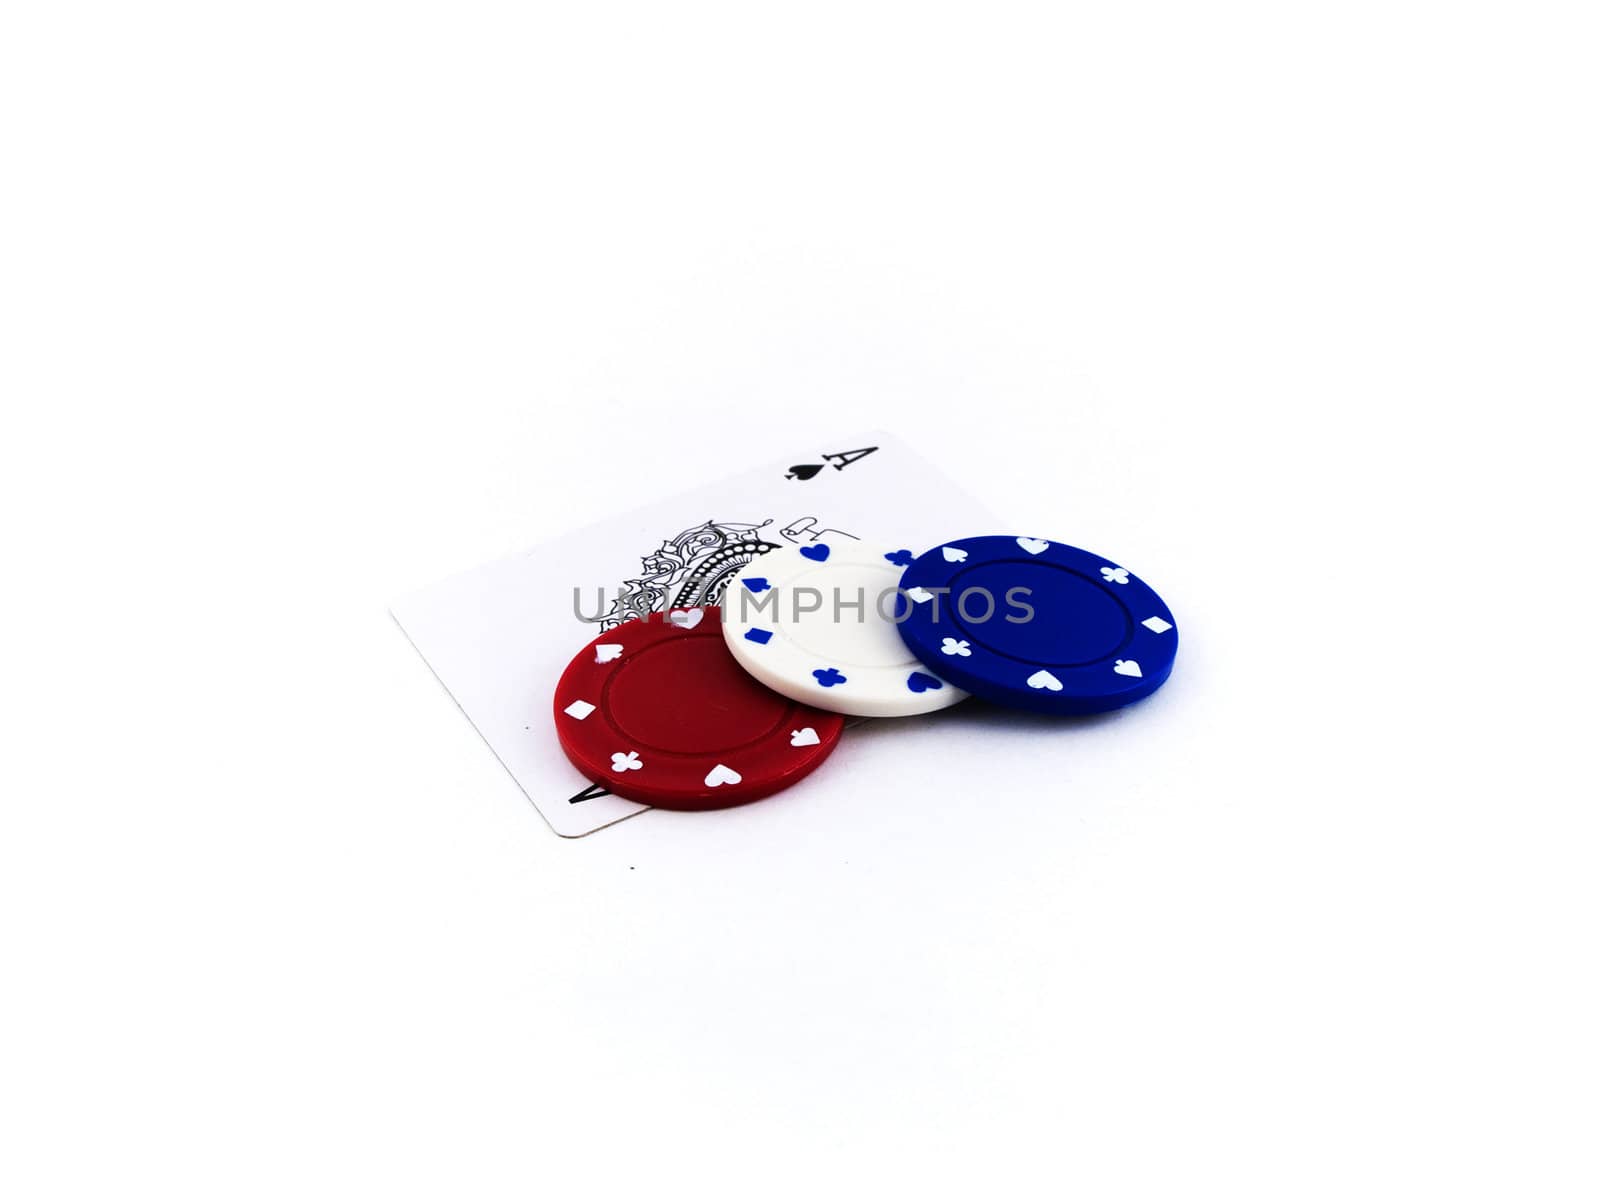 Red White and Blue Poker Chips on Playing Cards by bobbigmac